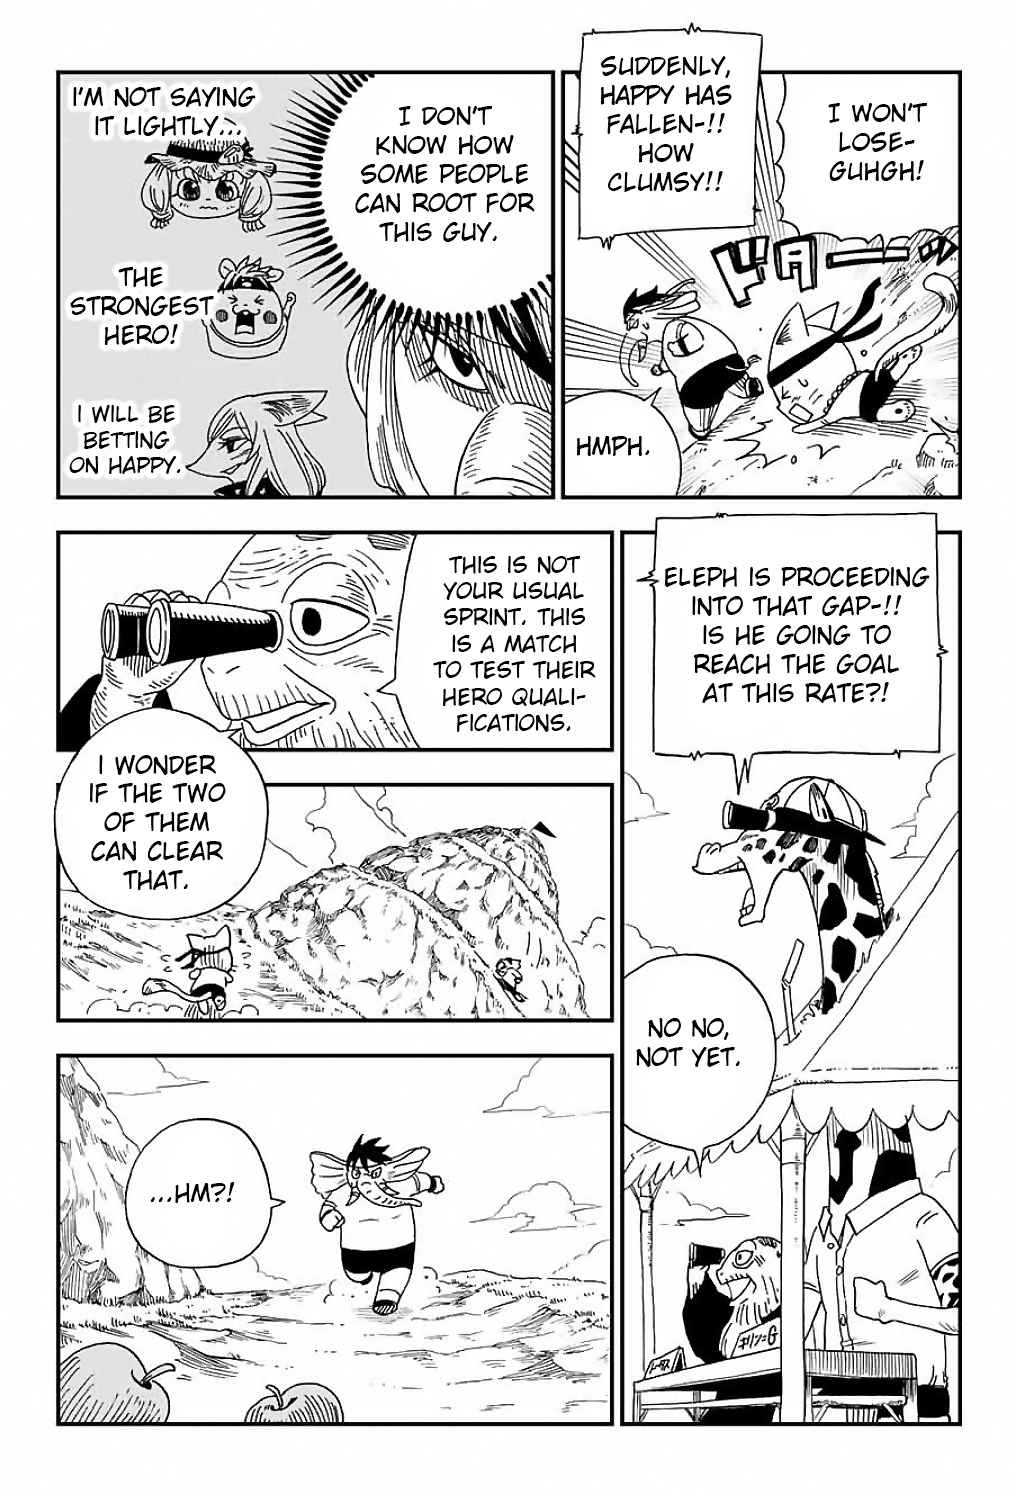 Fairy Tail: Happy's Great Adventure Ch. 9 The Hero Race Begins!!